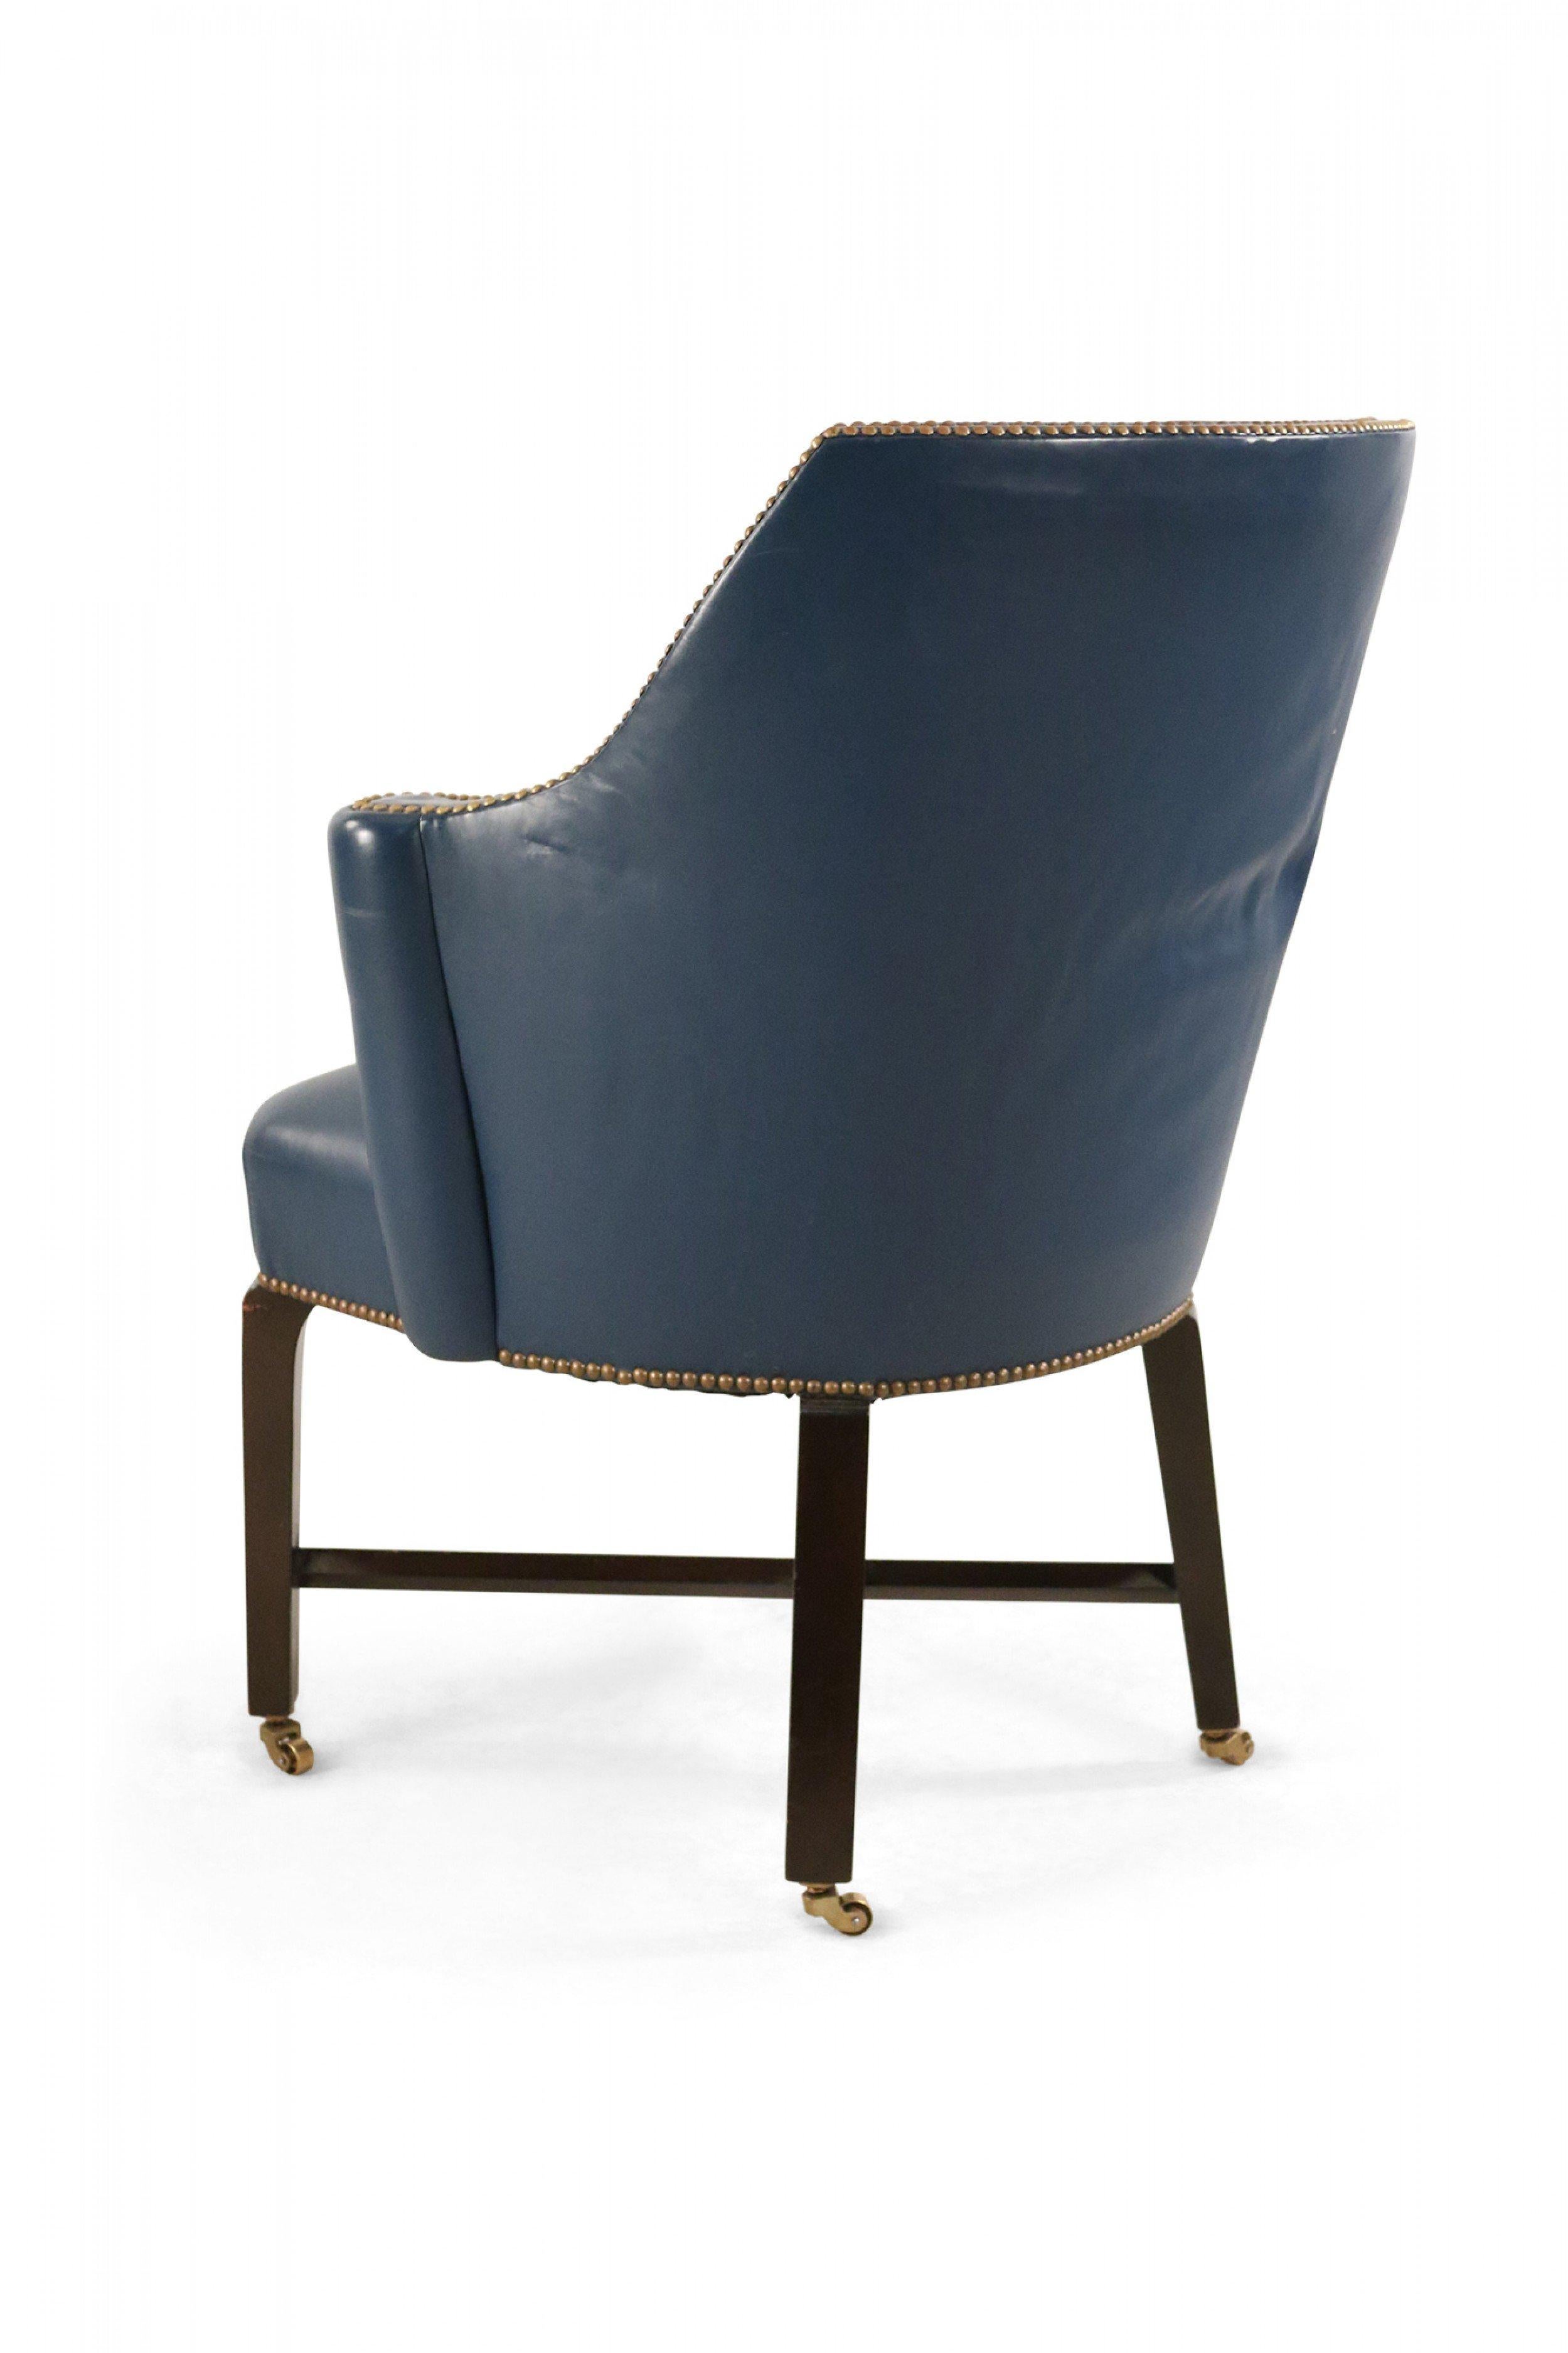 Contemporary Blue Leather Rounded Back Club / Armchair For Sale 6